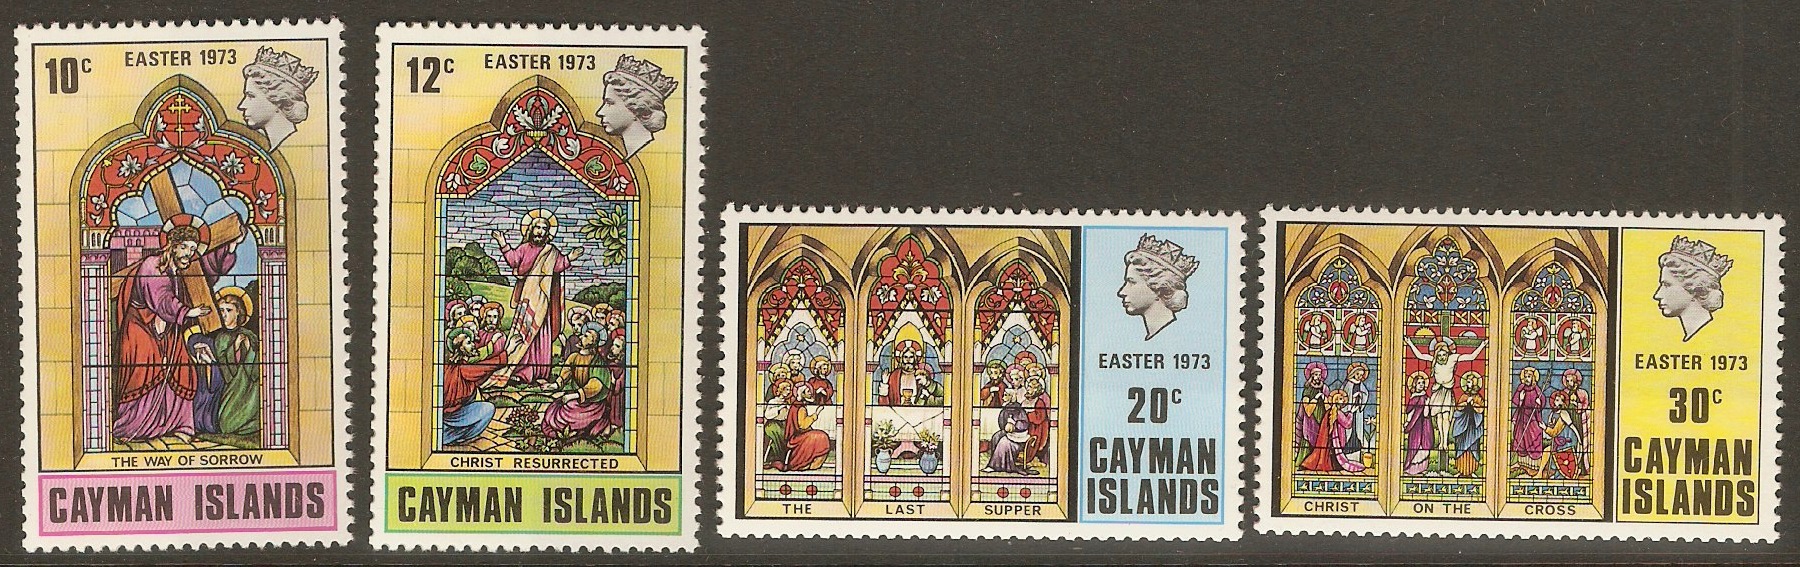 Cayman Islands 1973 Easter Stained Glass set. SG324-SG327.